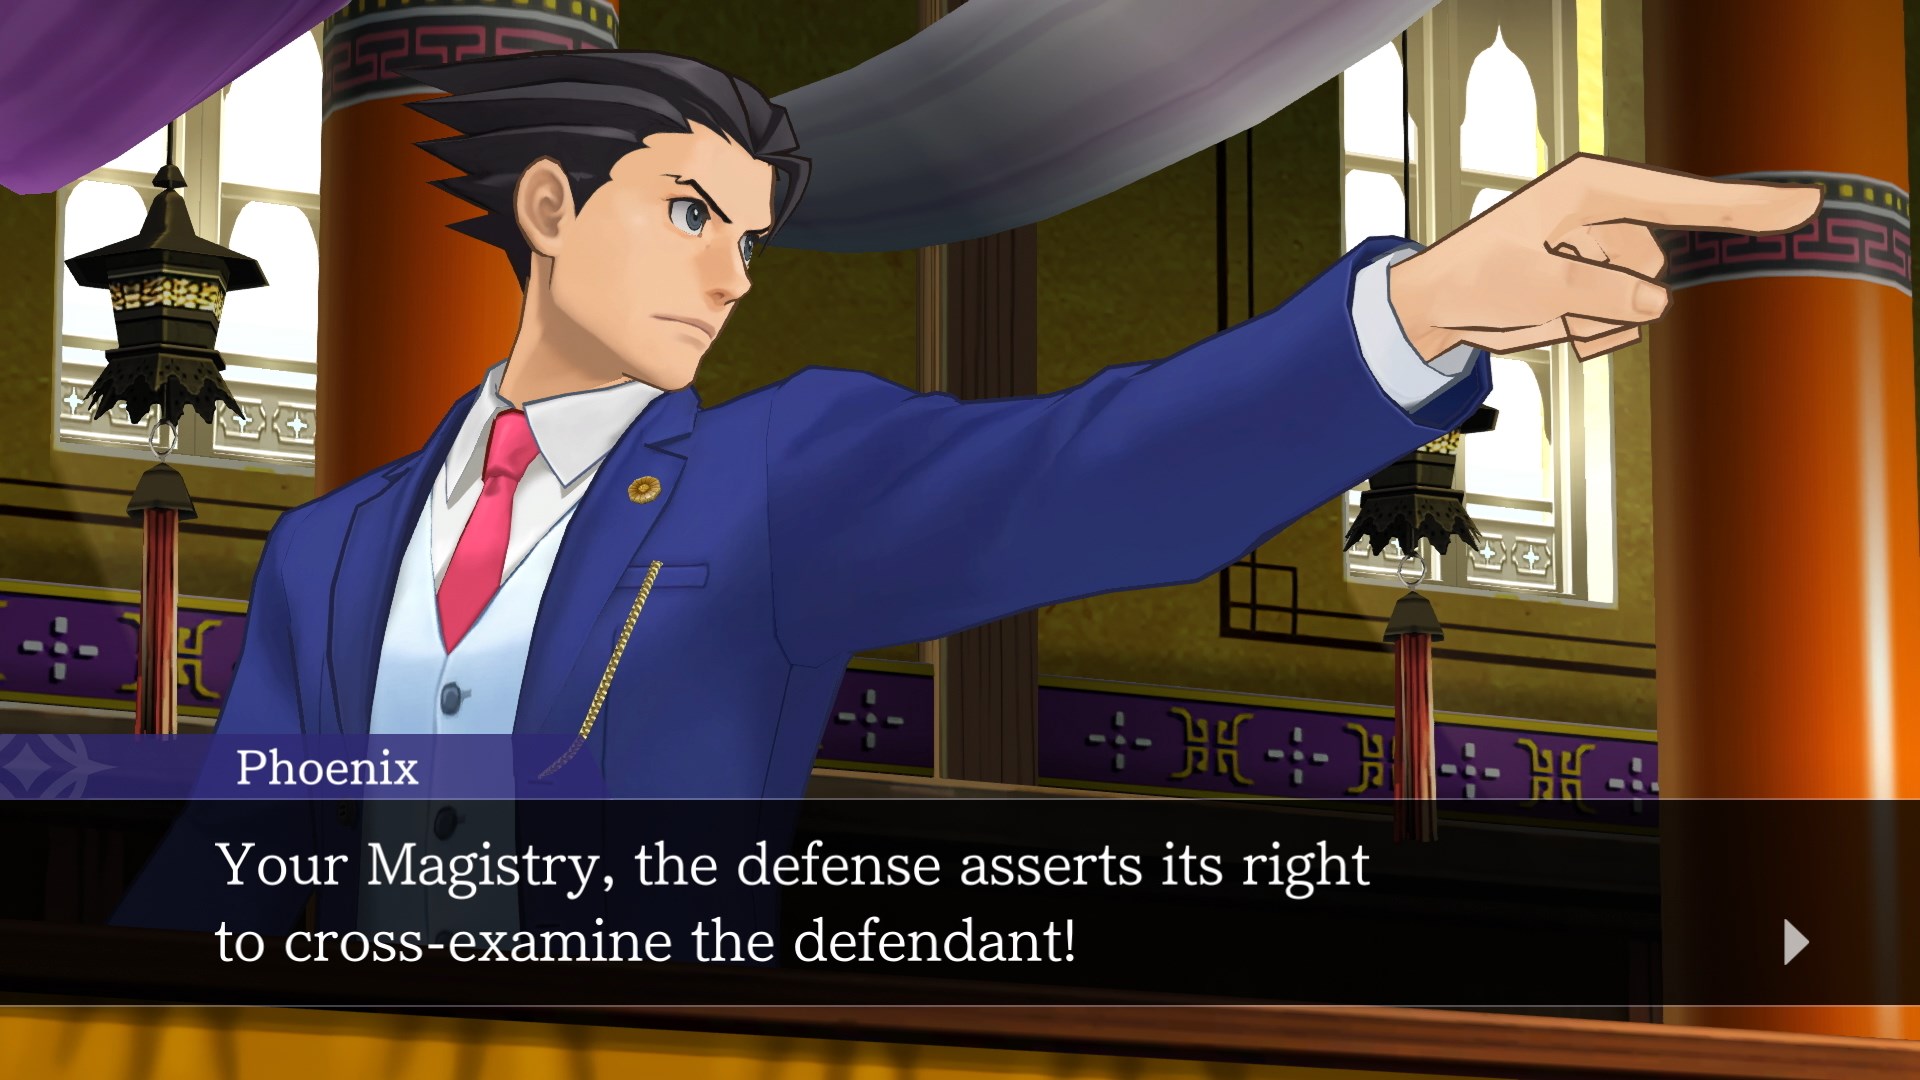 Apollo Justice: Ace Attorney Trilogy aims to attract both old and